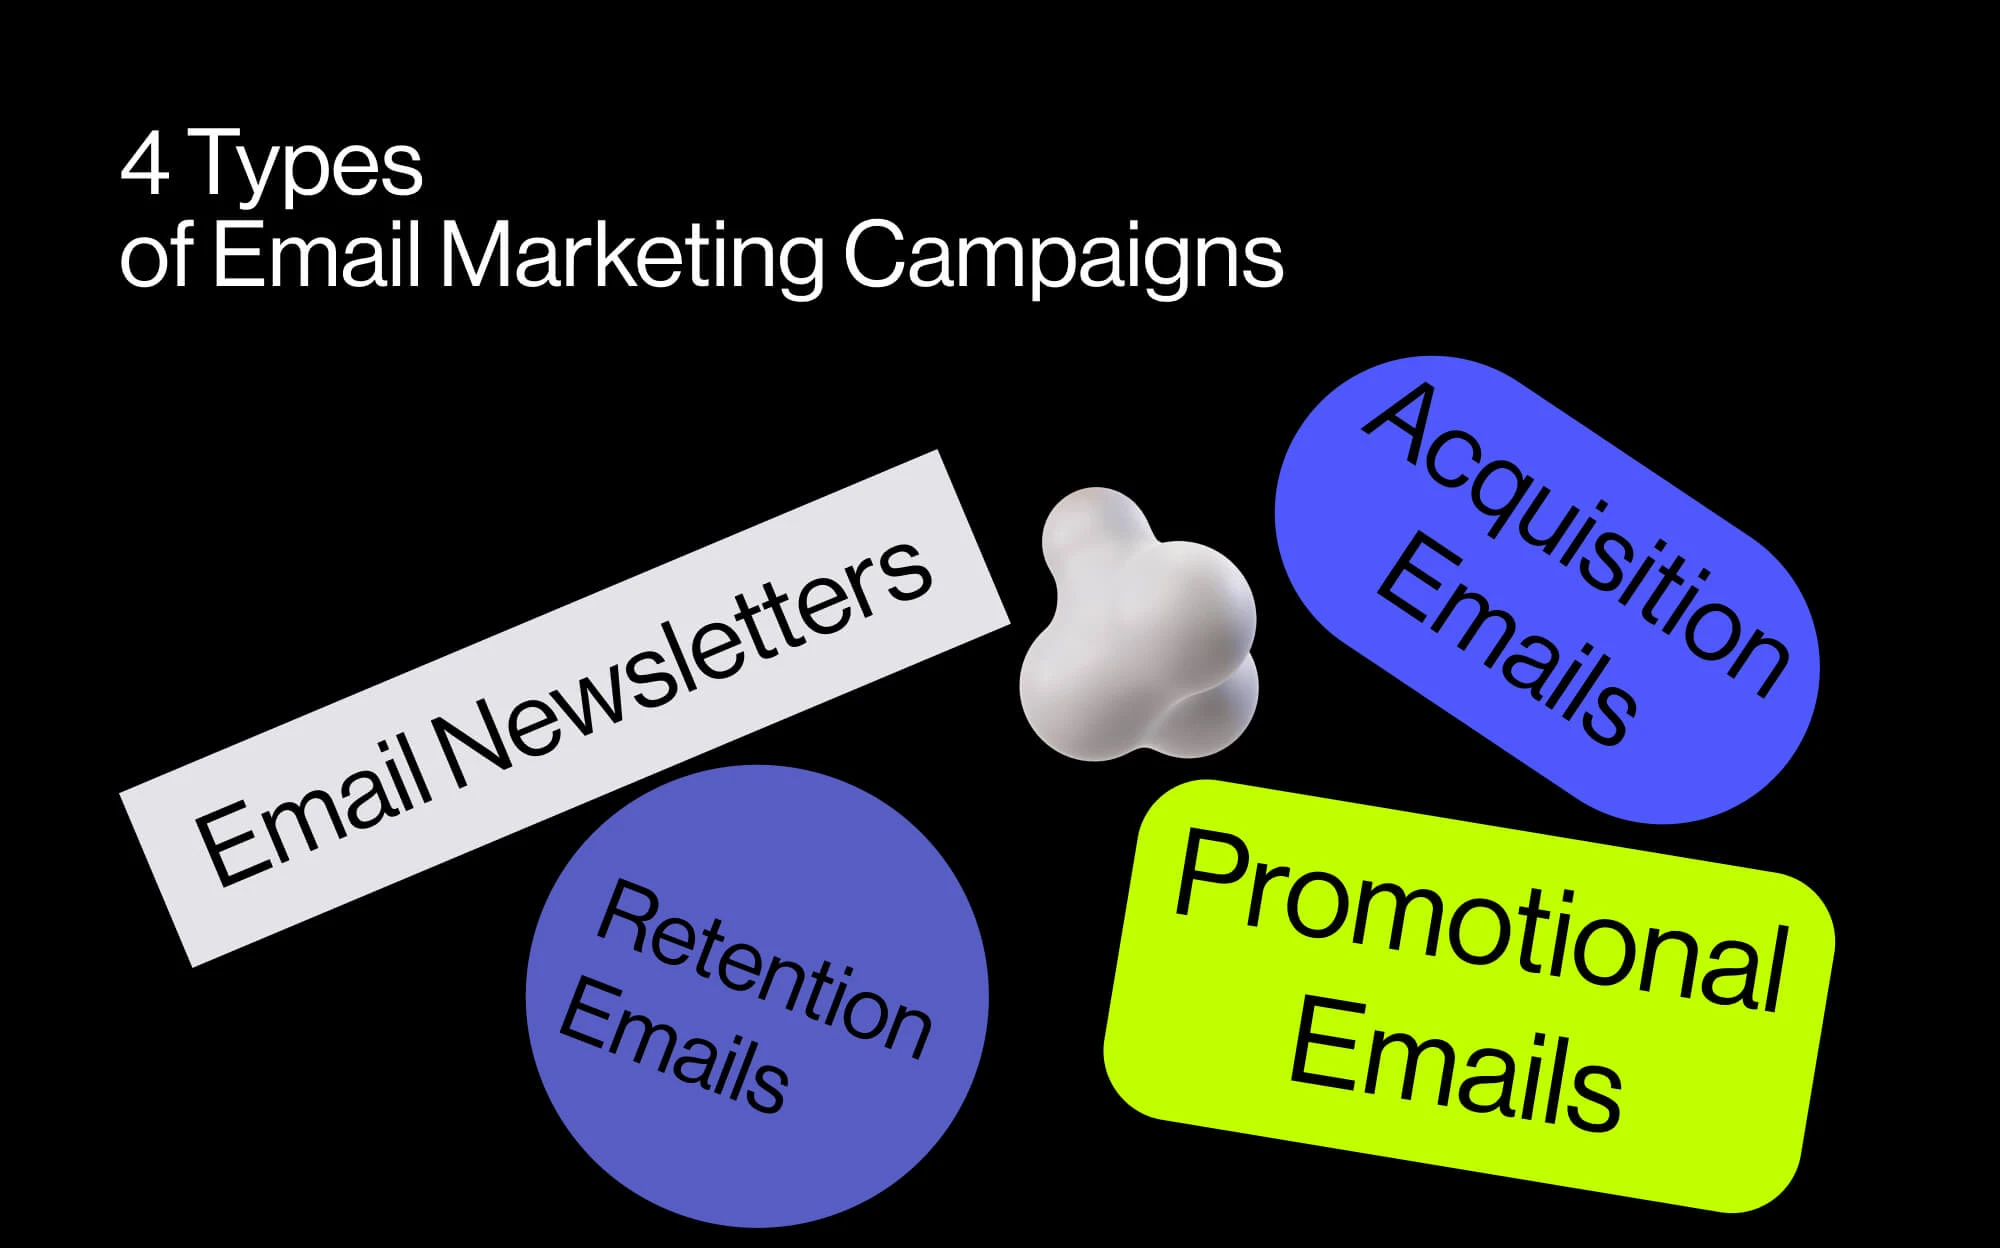 4 Main Types of Email Marketing